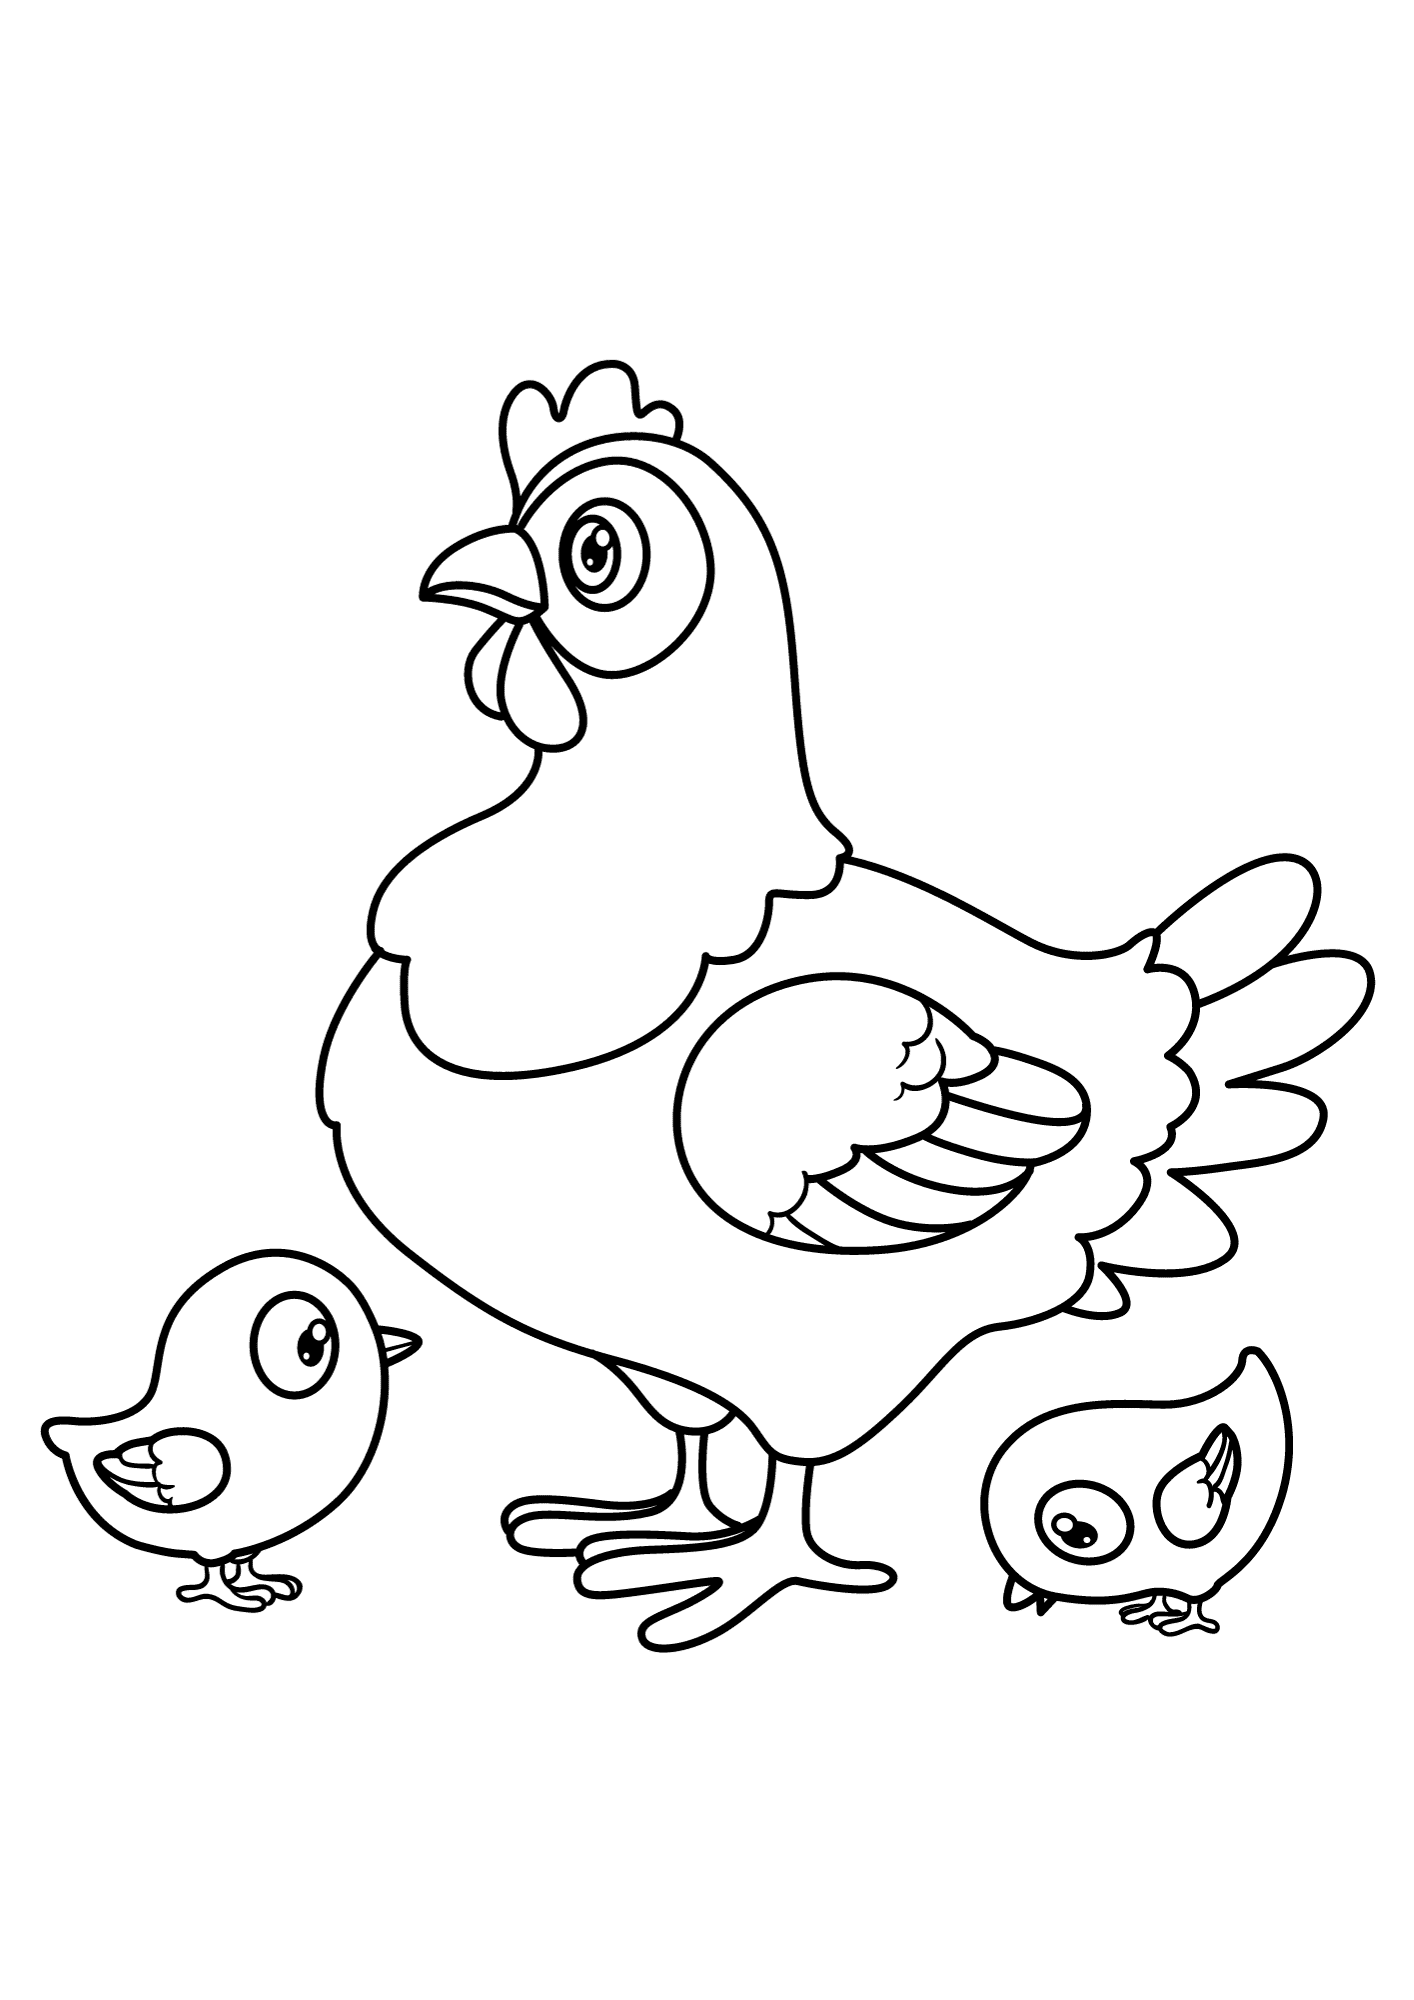 Cute Cartoon Hen With Chicks Coloring Page